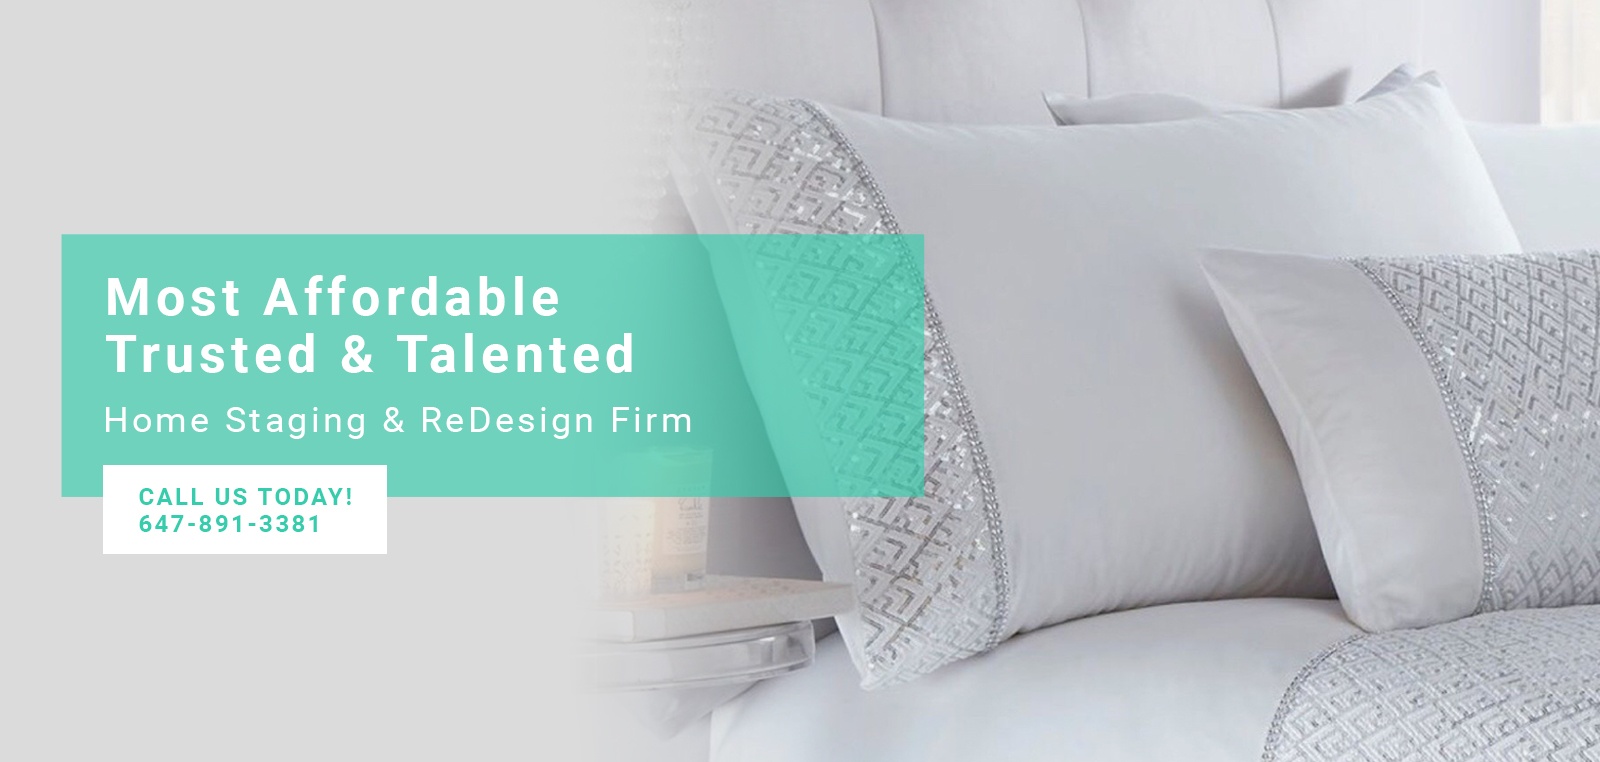 Designer Cushions - Home Staging Services Hamilton by Destined Dreams